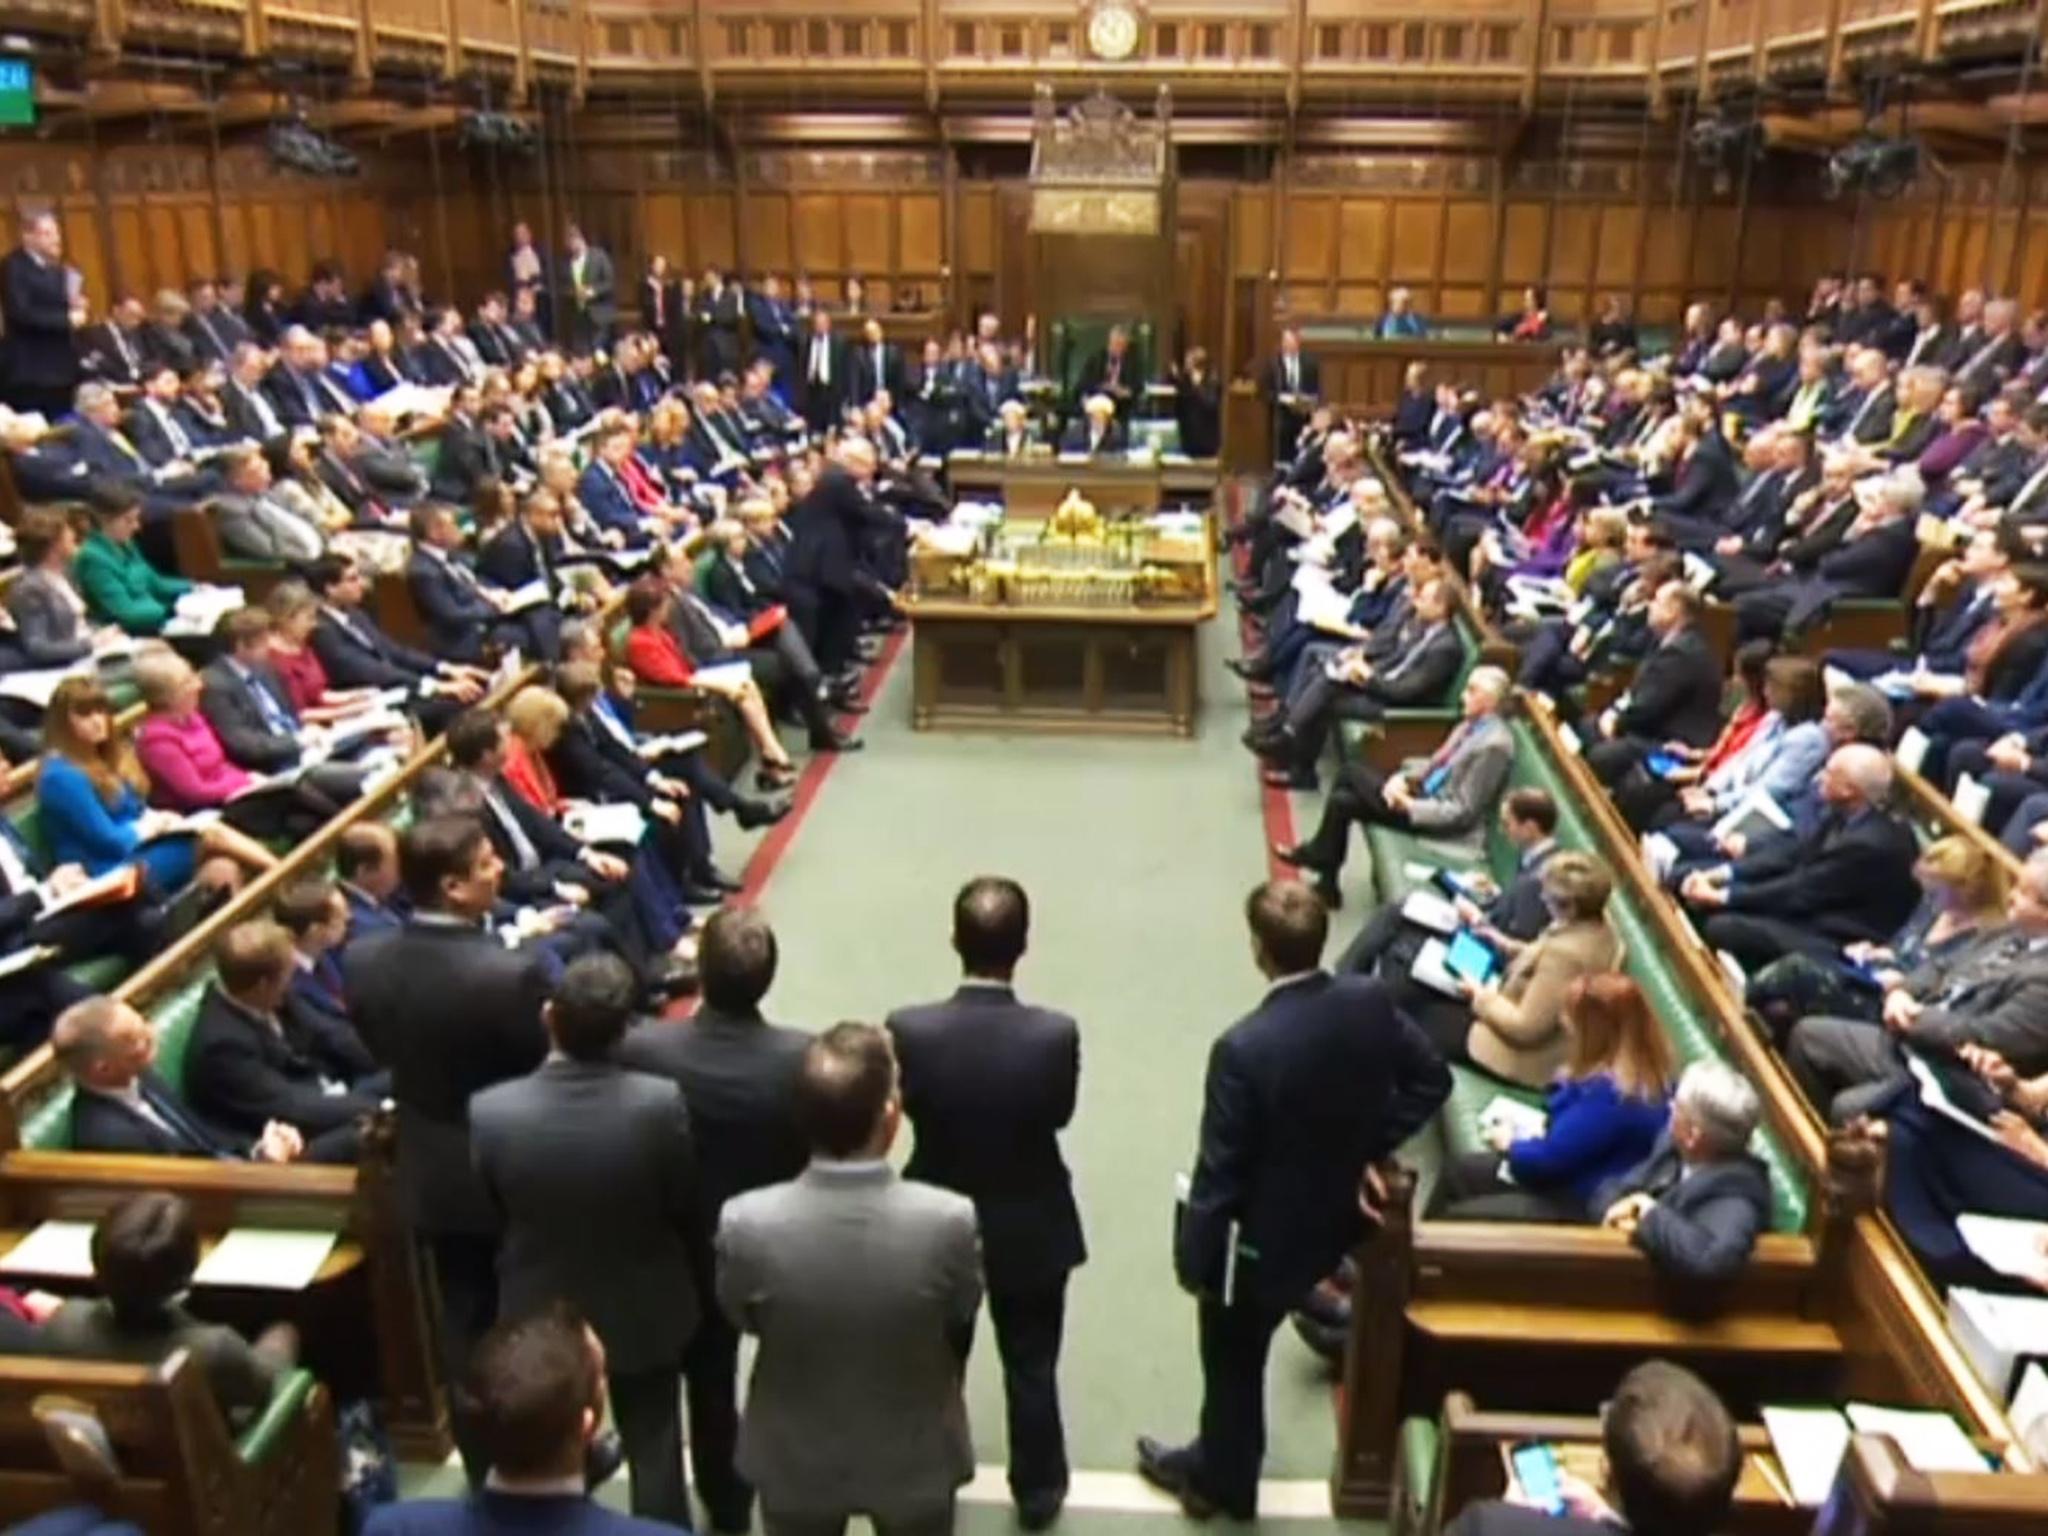 MPs will continue debating the European Union Bill on Monday